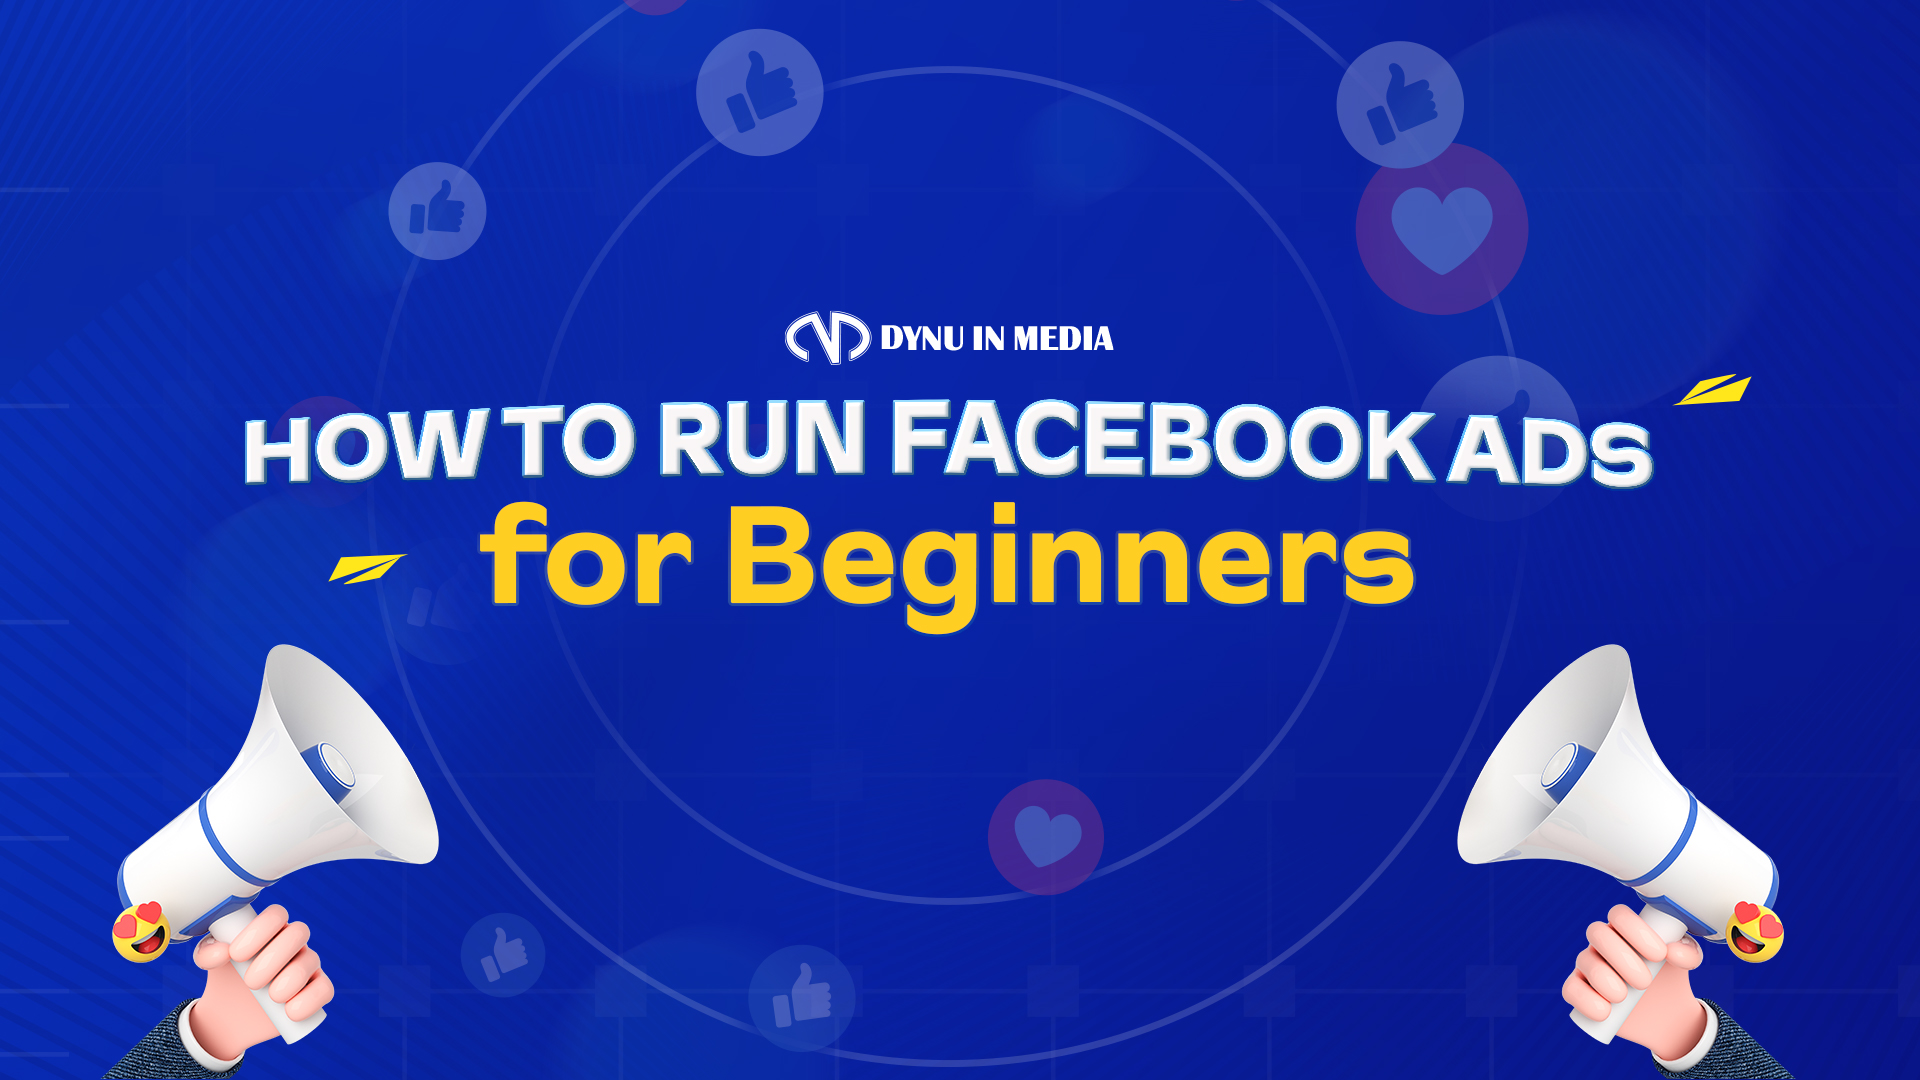 How to Run Facebook Ads for Beginners